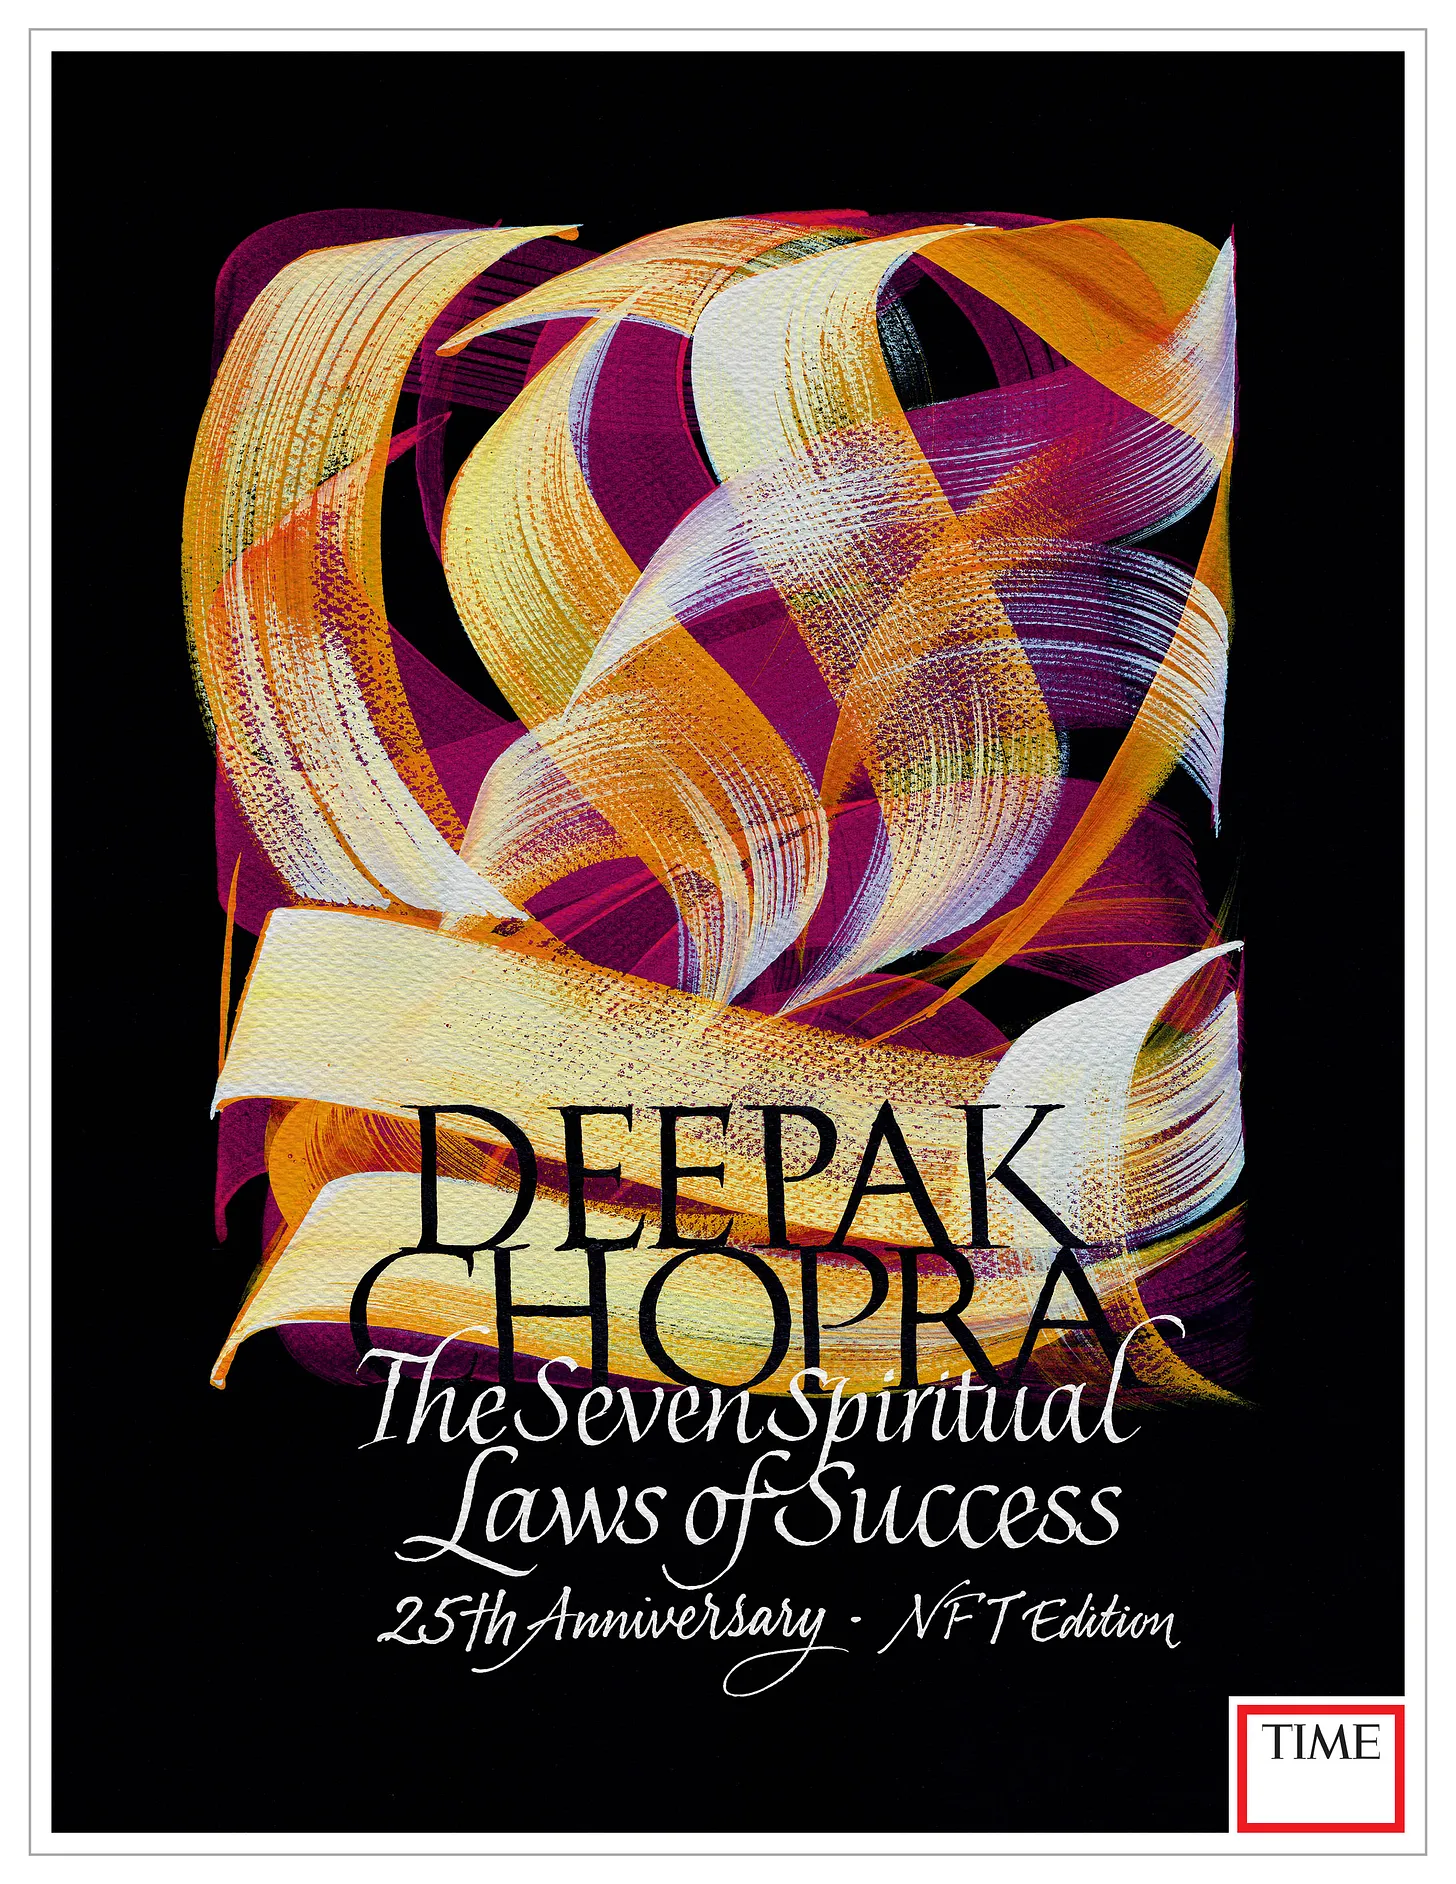 Alt tag: Cover of The Seven Spiritual Laws of Success, 25th Anniversary NFT Edition by Deepak Chopra. Ask me my opinion of the production values sometime.